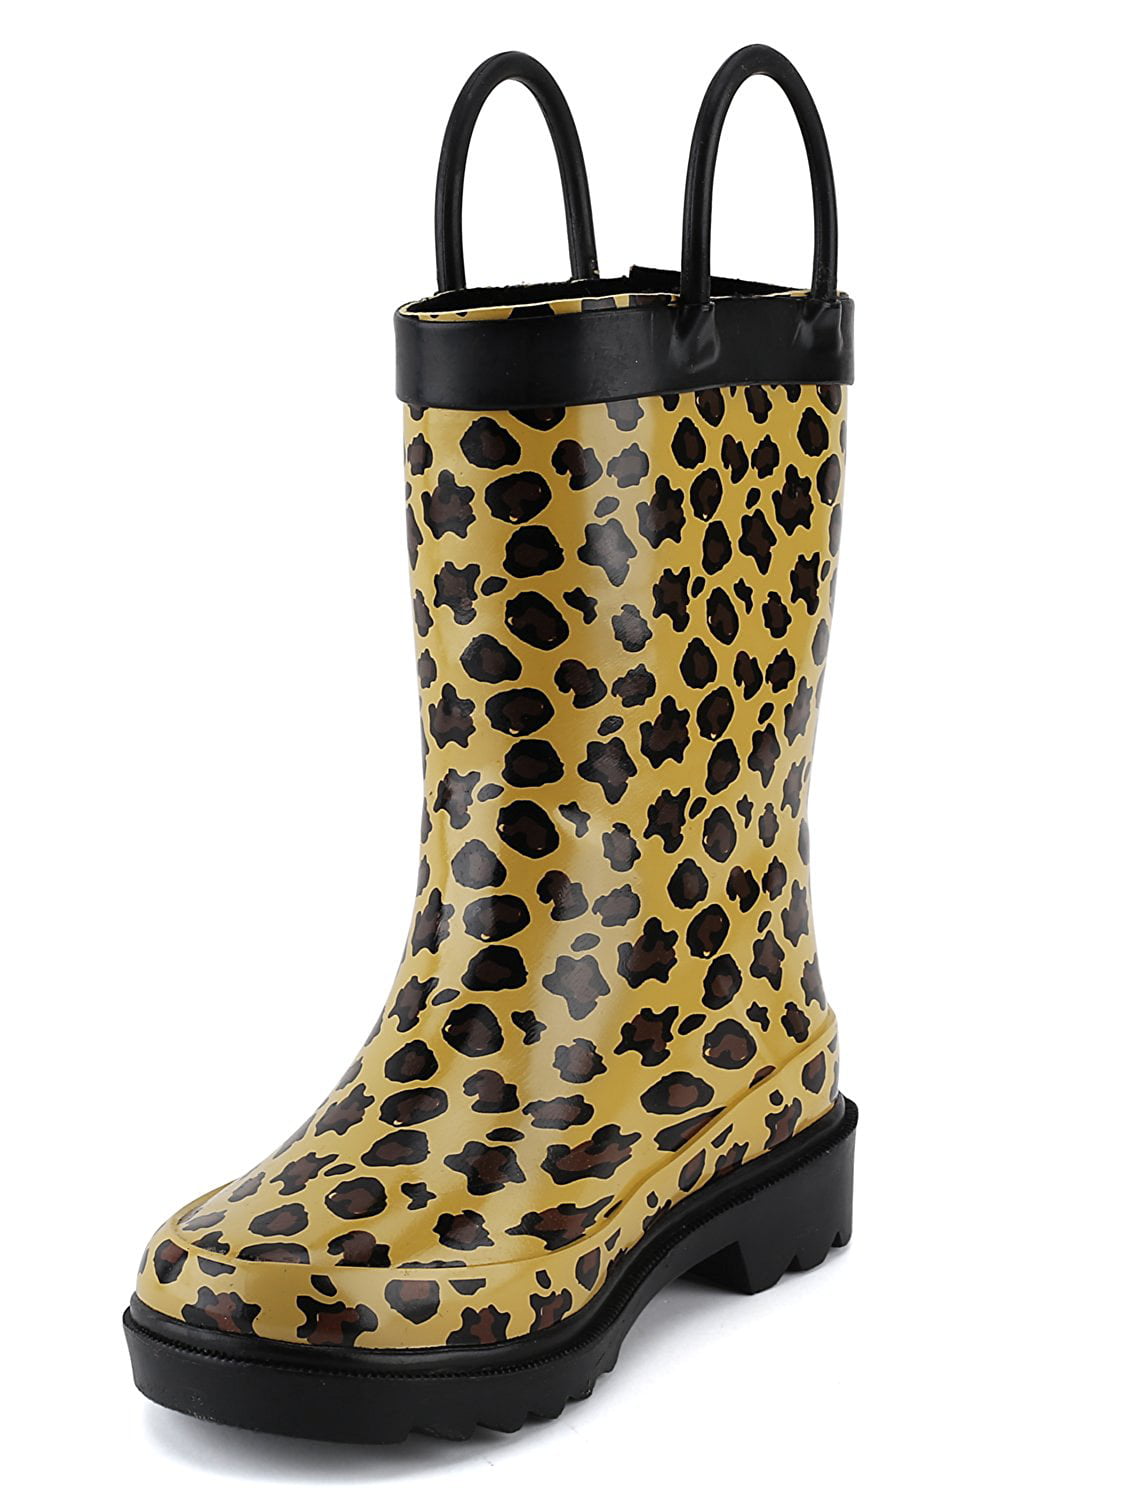 Details about   new Cheetah print  cute Ankle youth  girls Boots  Size 2